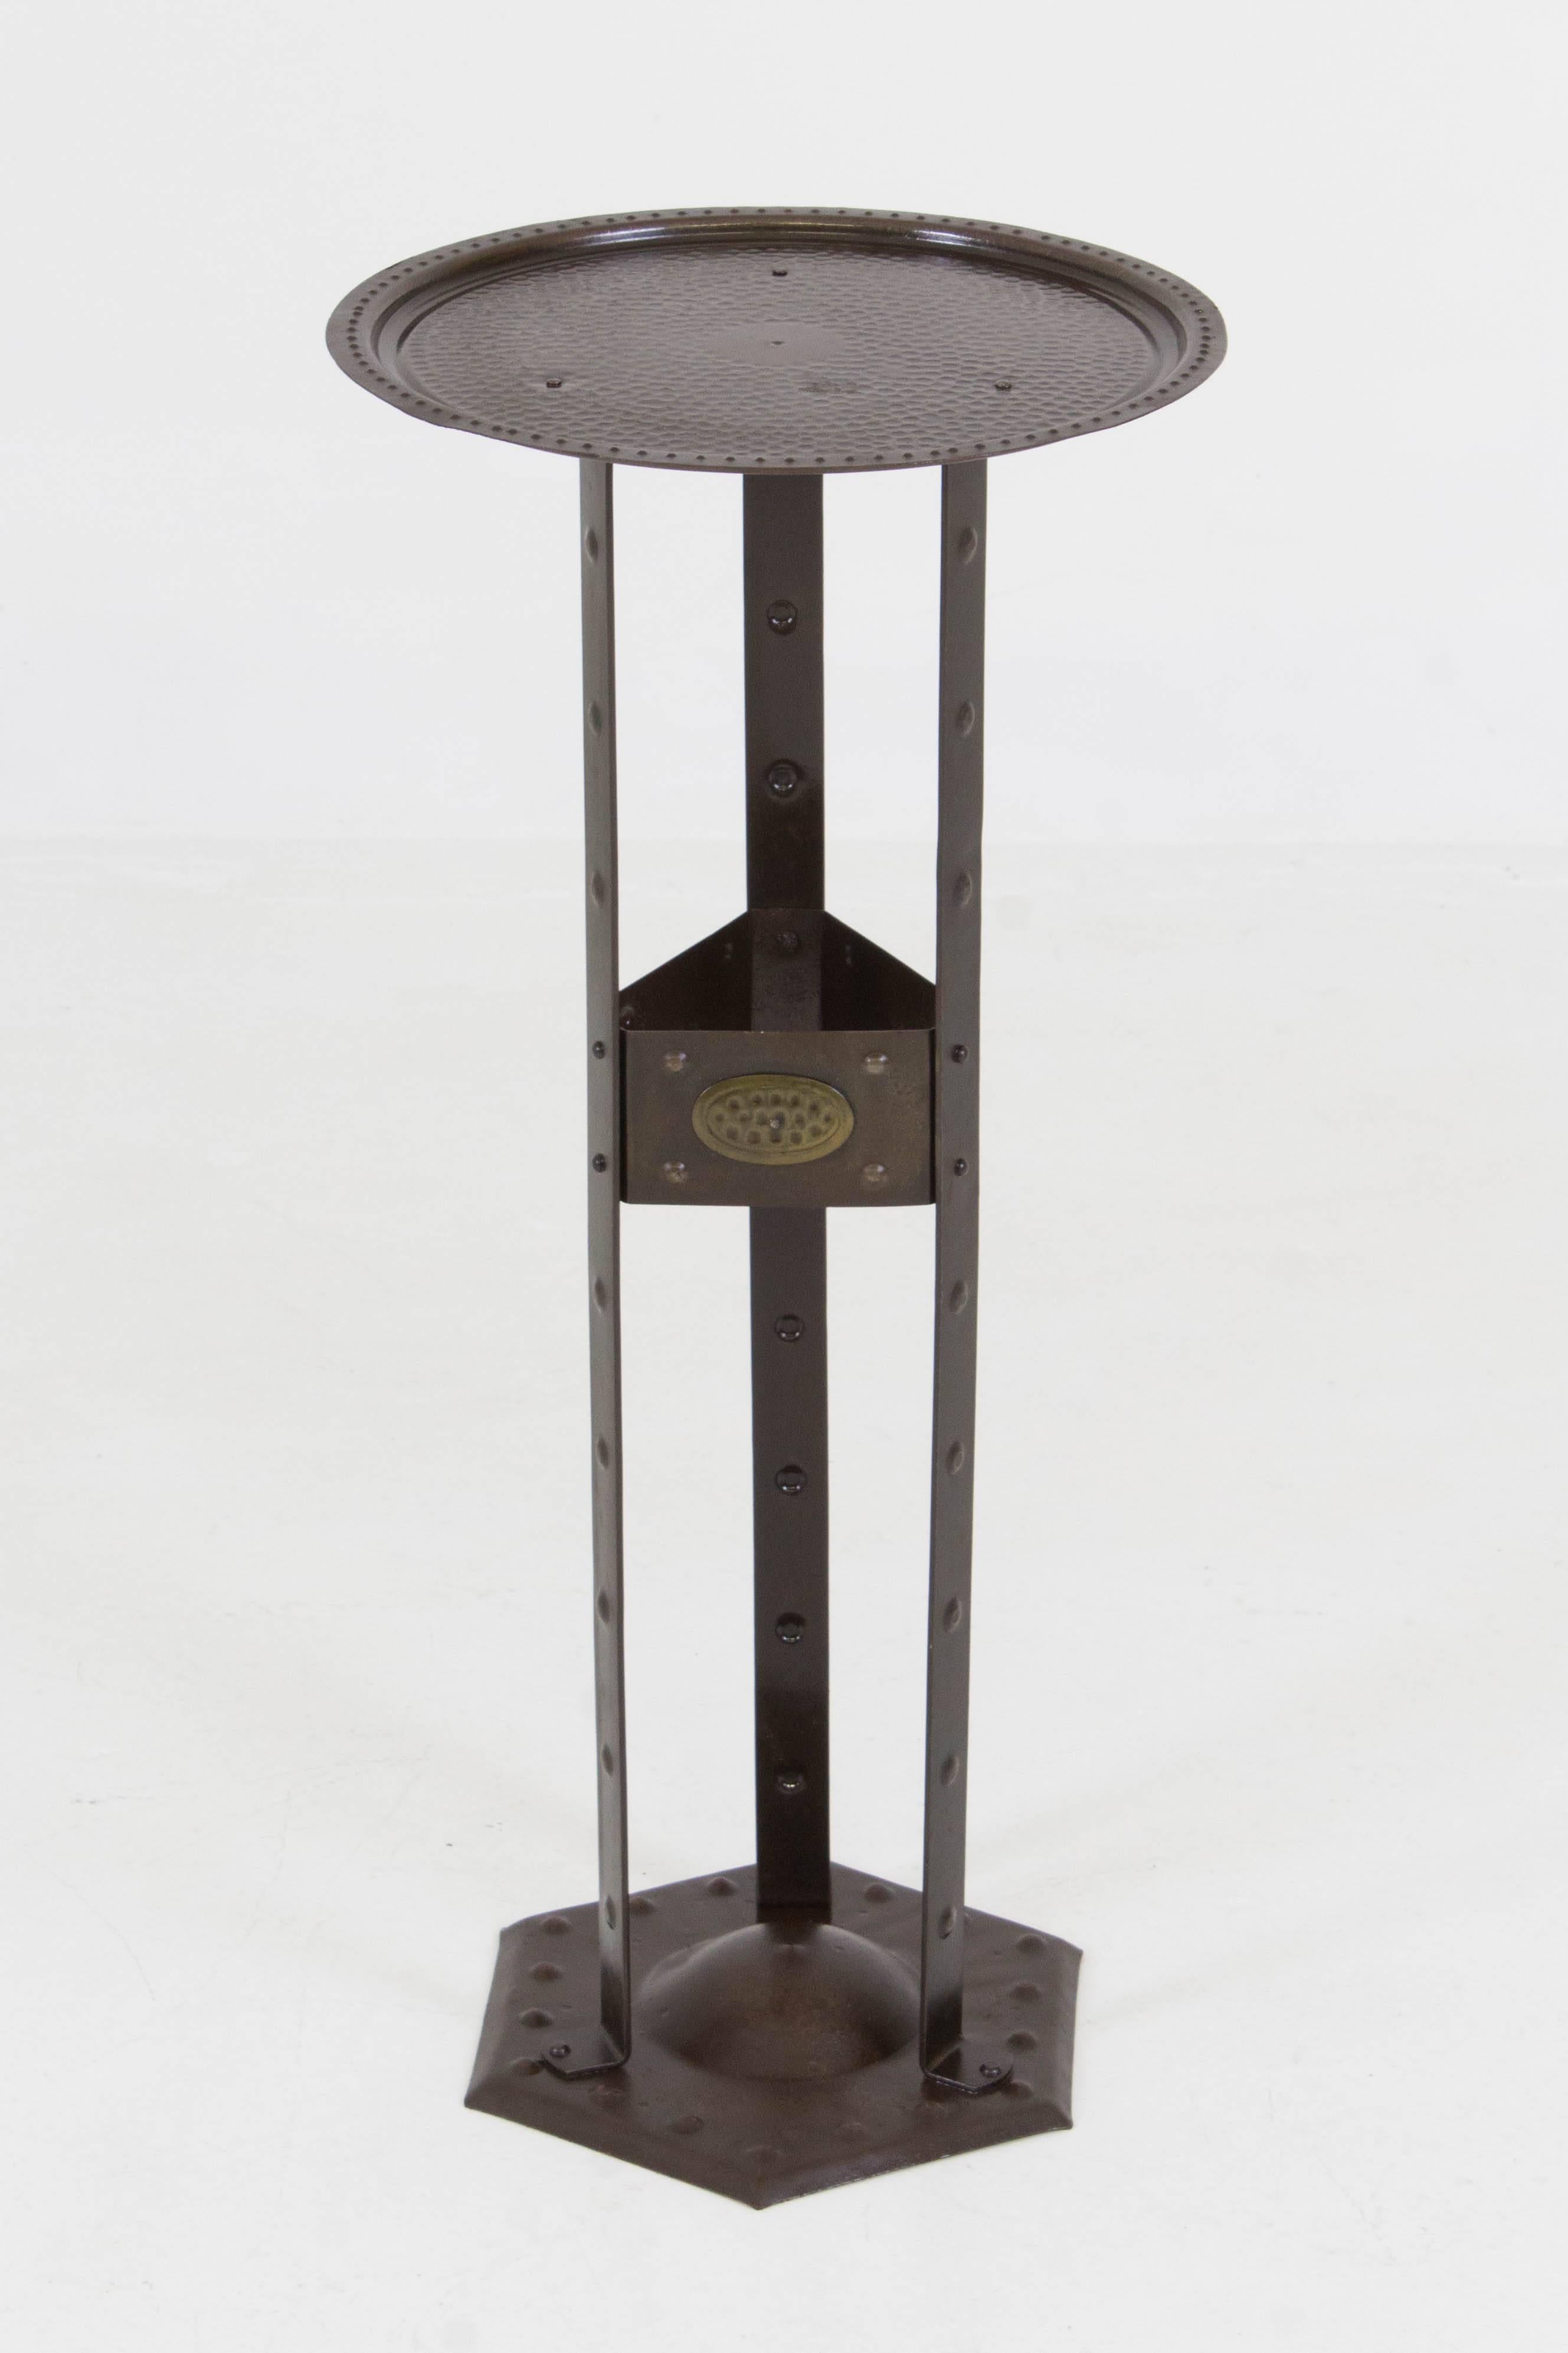 Vienna Secession Hugo bergere Goberg pedestal table, 1900s.
Patinated iron and impressed Goberg mark.
In good original condition with minor wear consistent with age and use,
preserving a beautiful patina.